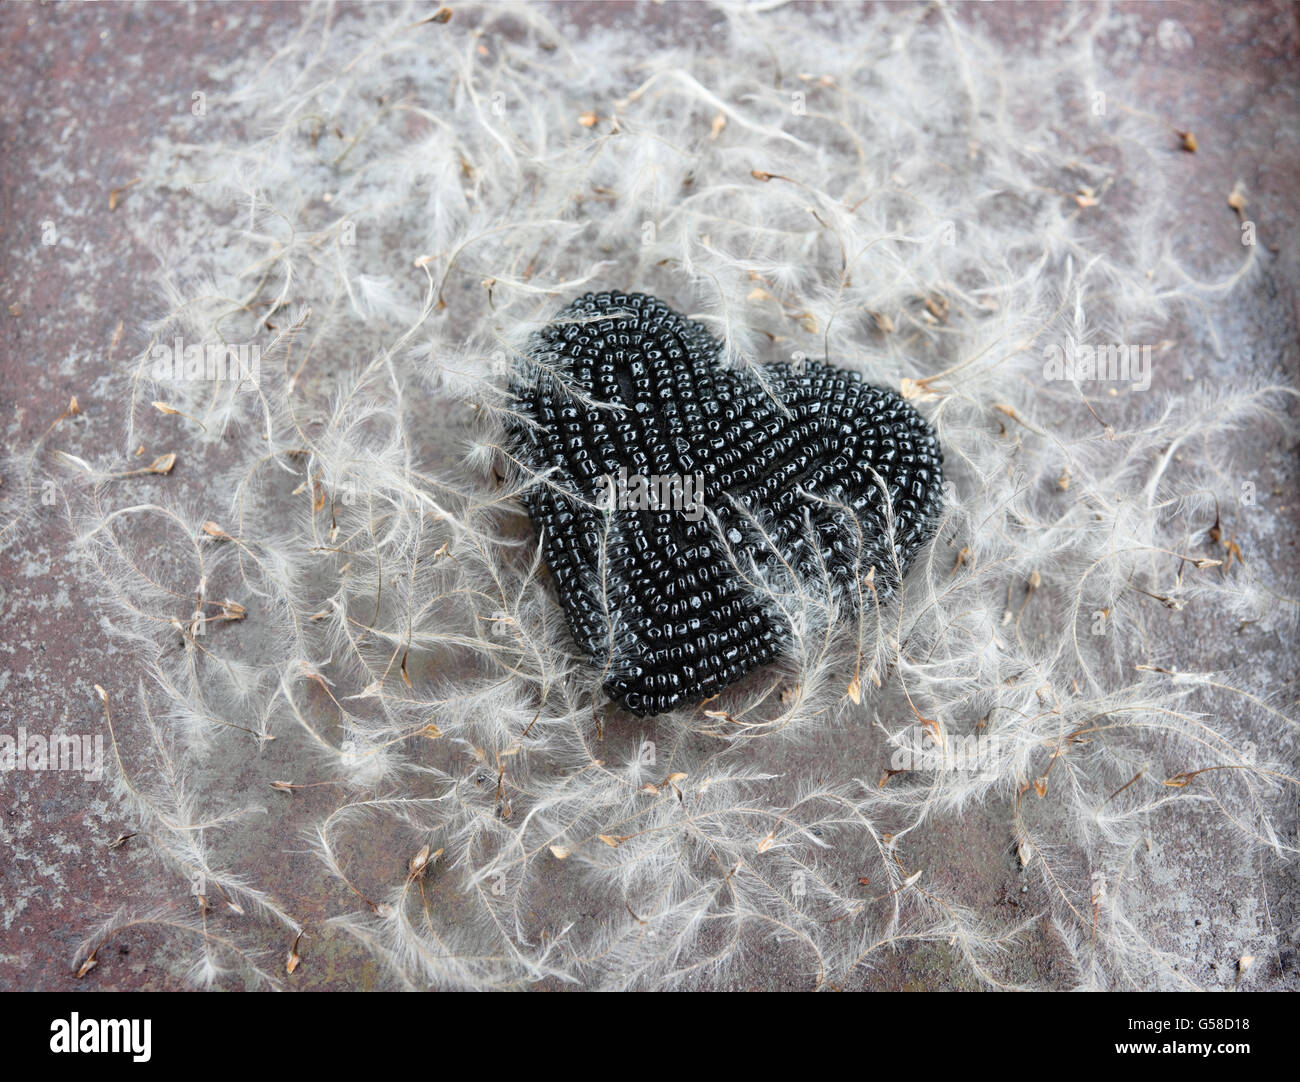 Black bead heart on rusty tin lid, surrounded by and overlain by feathery clematis seeds. Stock Photo